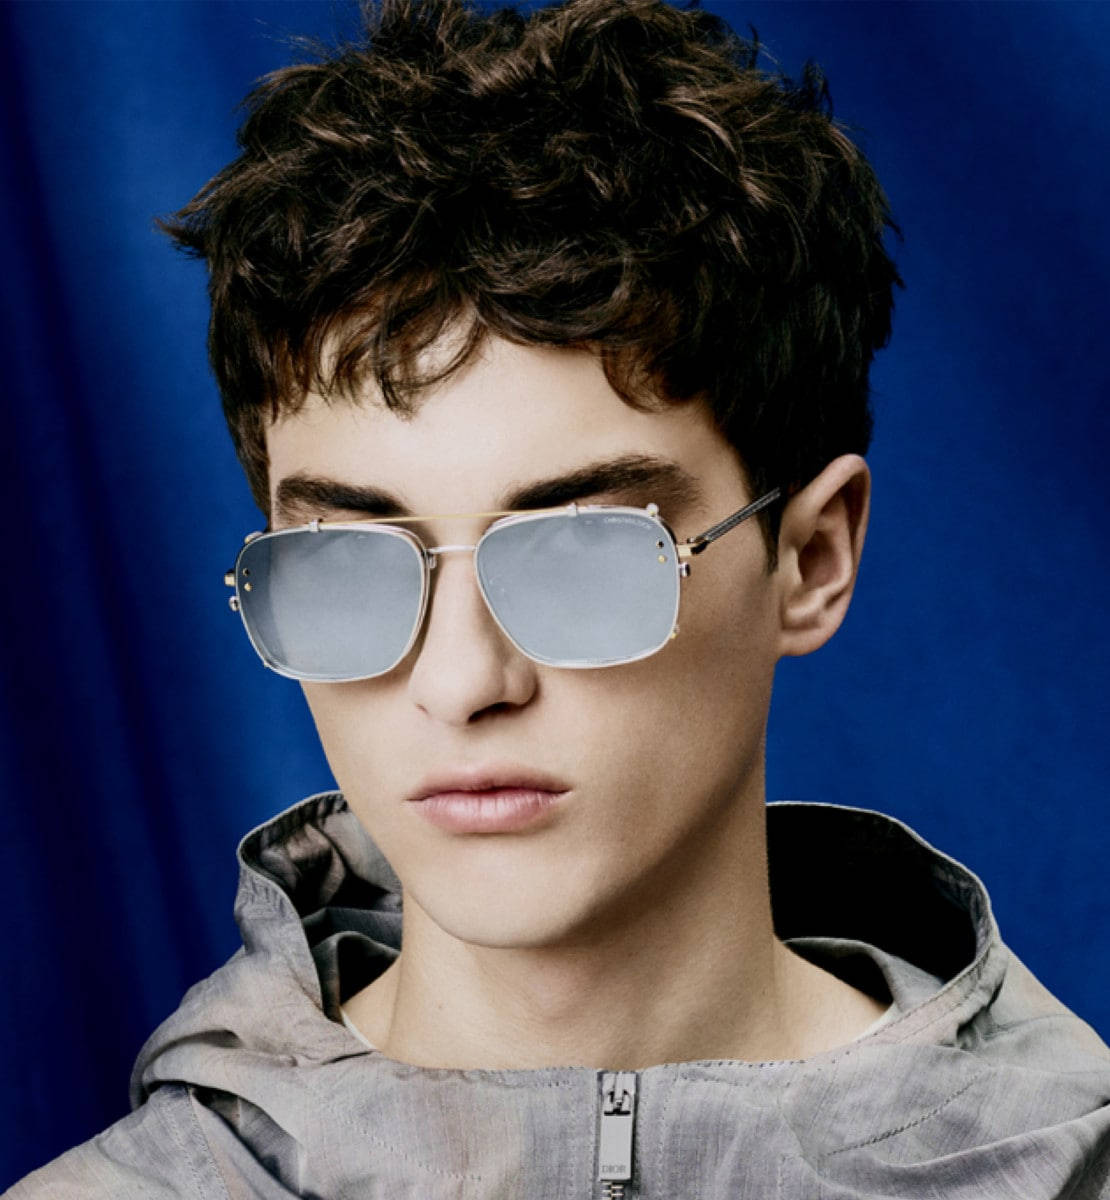 Exquisite Silver Sunglasses By Christian Dior Background